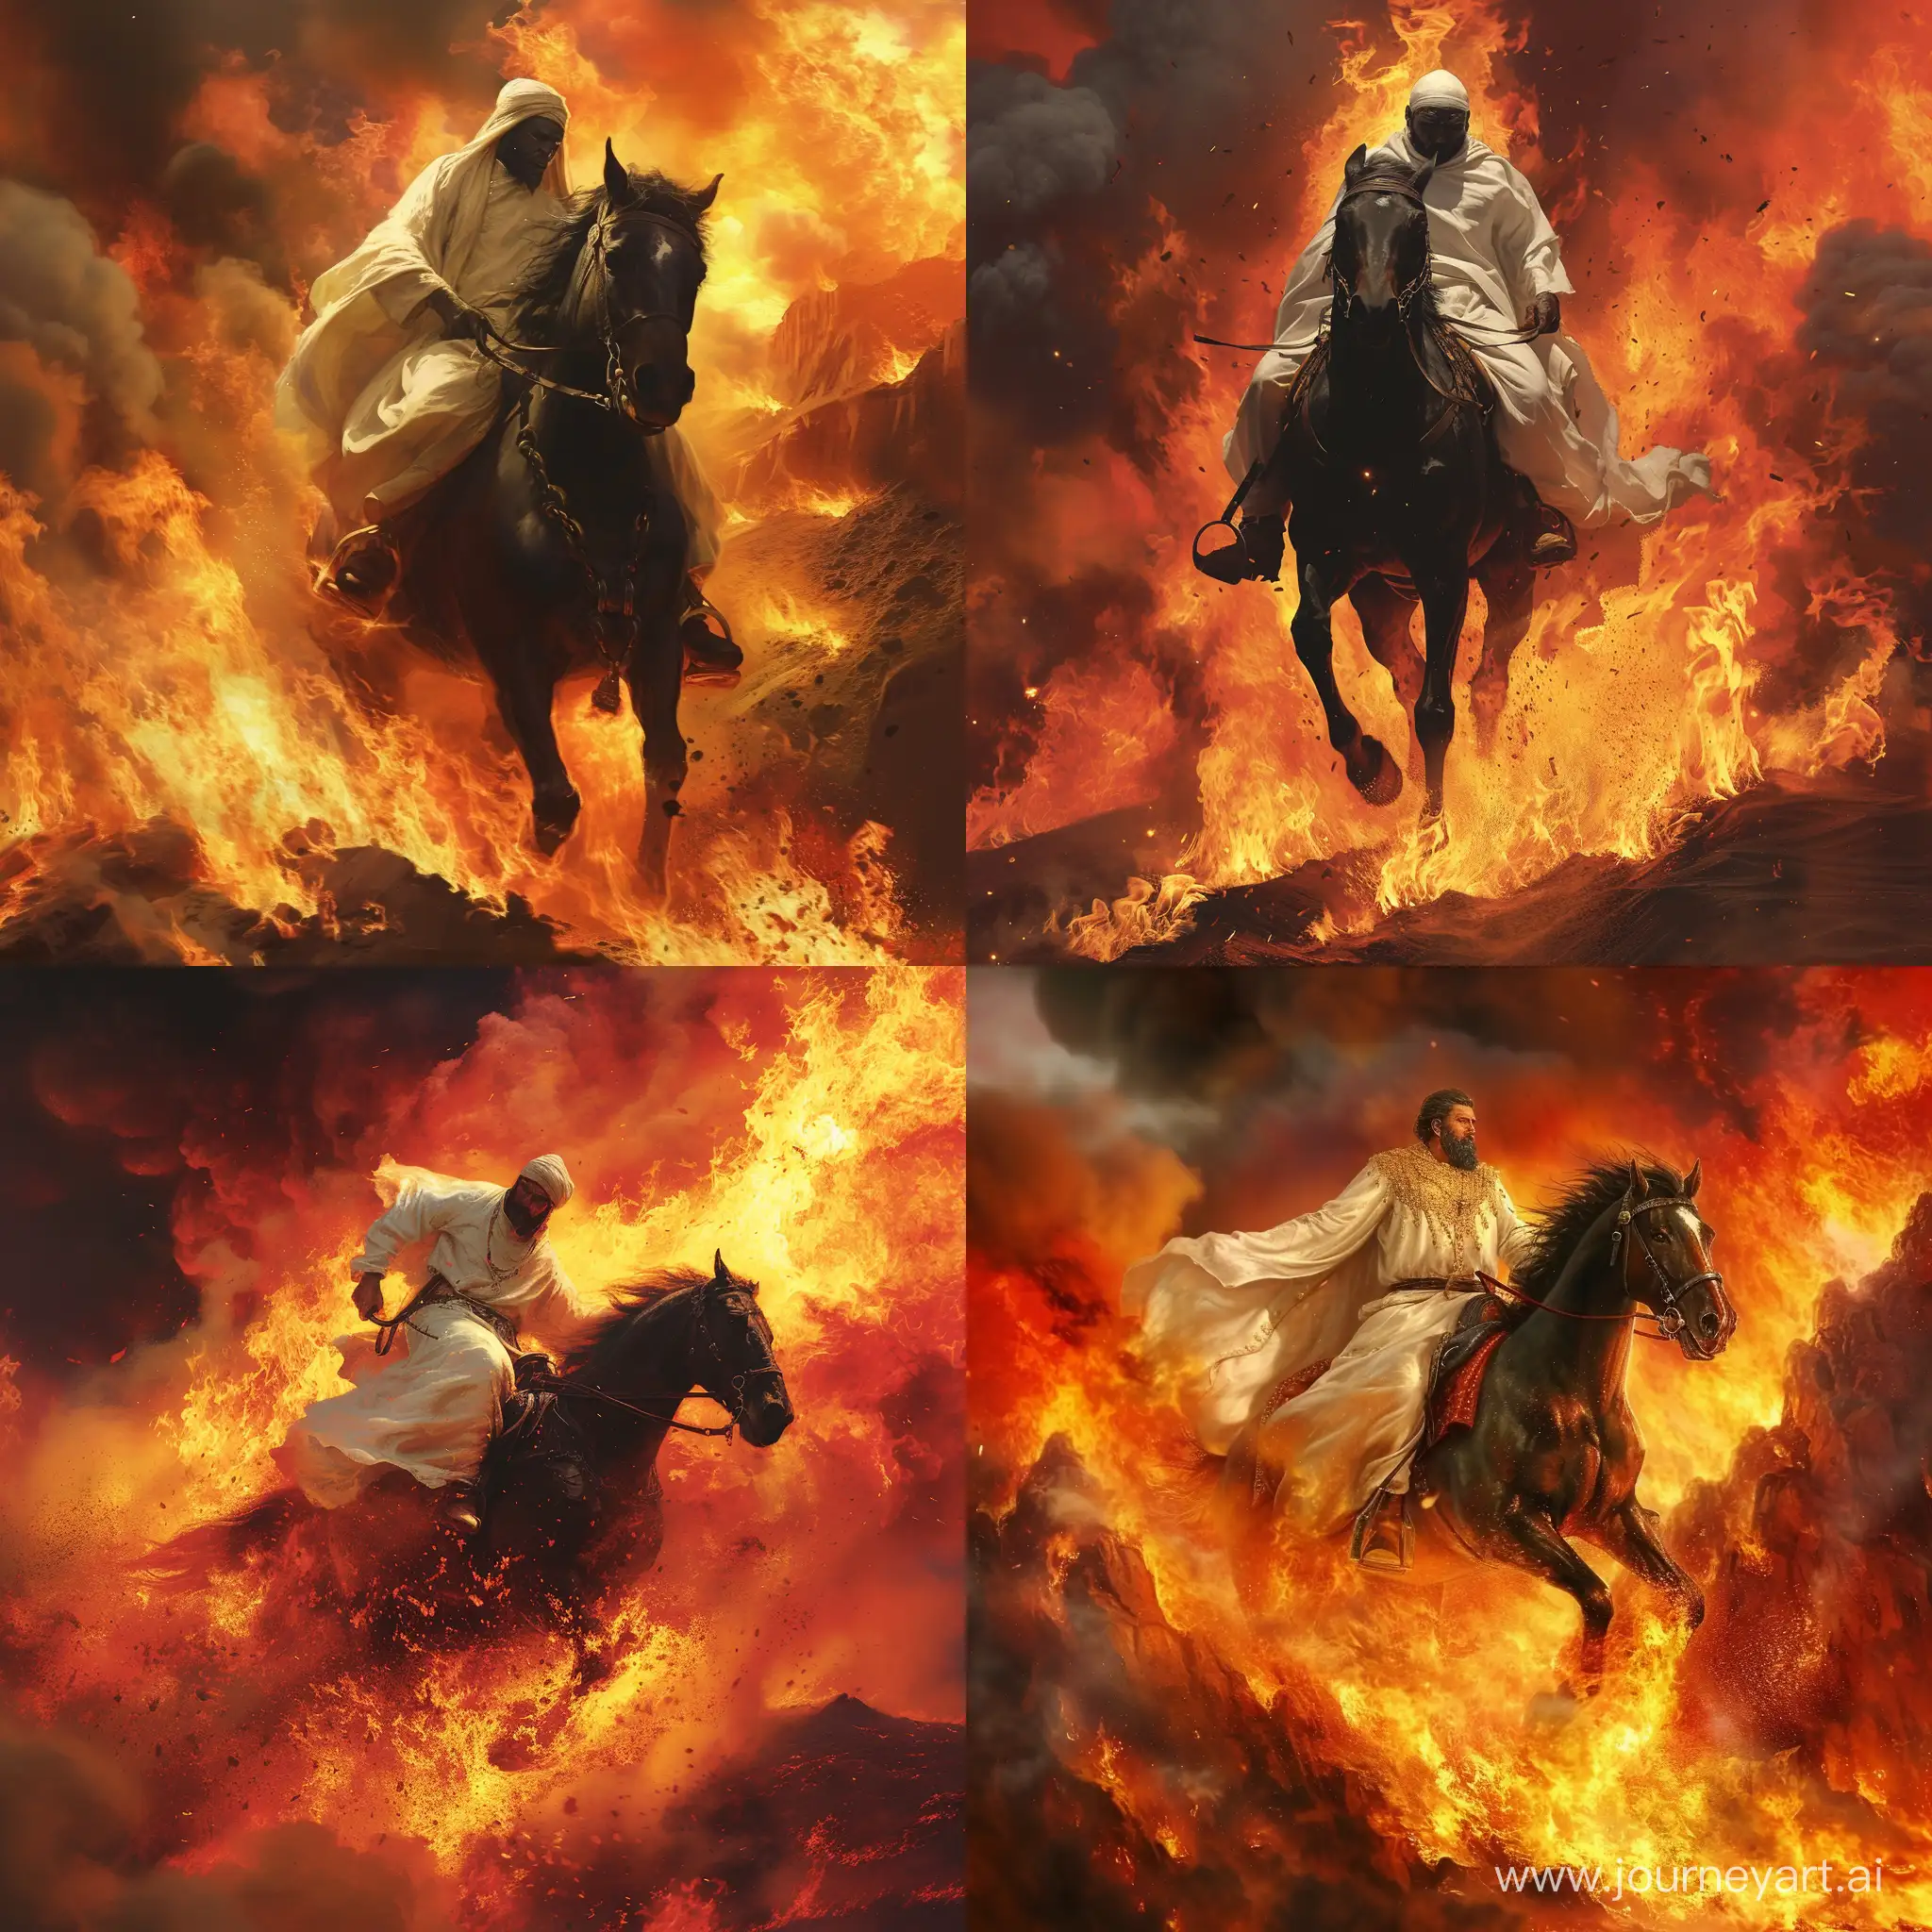 His son Siavash wanted to go to the mountain of fire to prove his innocence. Siavash harnessed his horse and went into the flame. There was a sad cry from all the people in the plain and the city
And Siavash rode without fear, and his white robes and ebony horse gleamed amid the flames. He reached the end of the road, and when he came out, the smoke had not even blackened his dress.
When the people saw that he had come out alive, they shouted cheerfully.